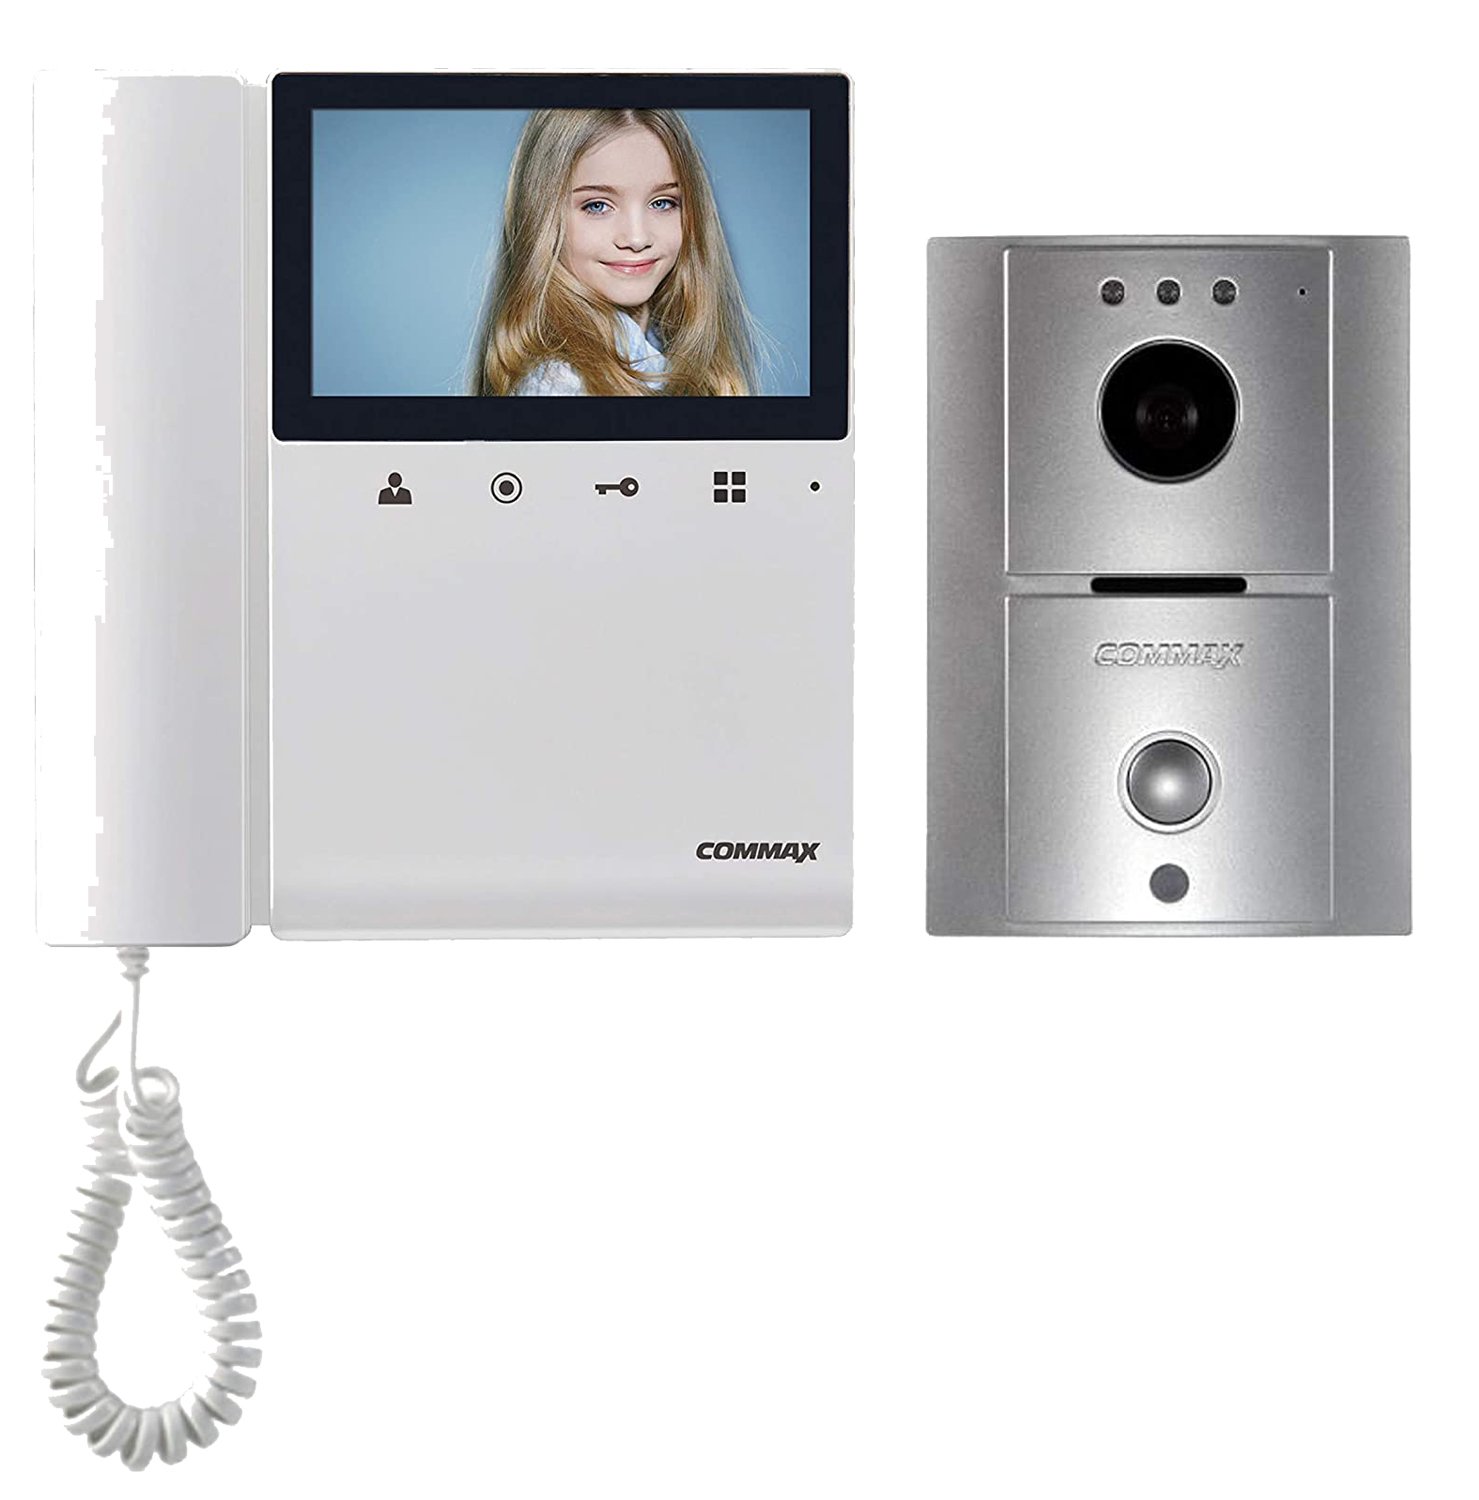 home intercom system in dubai by N Tech Security Systems